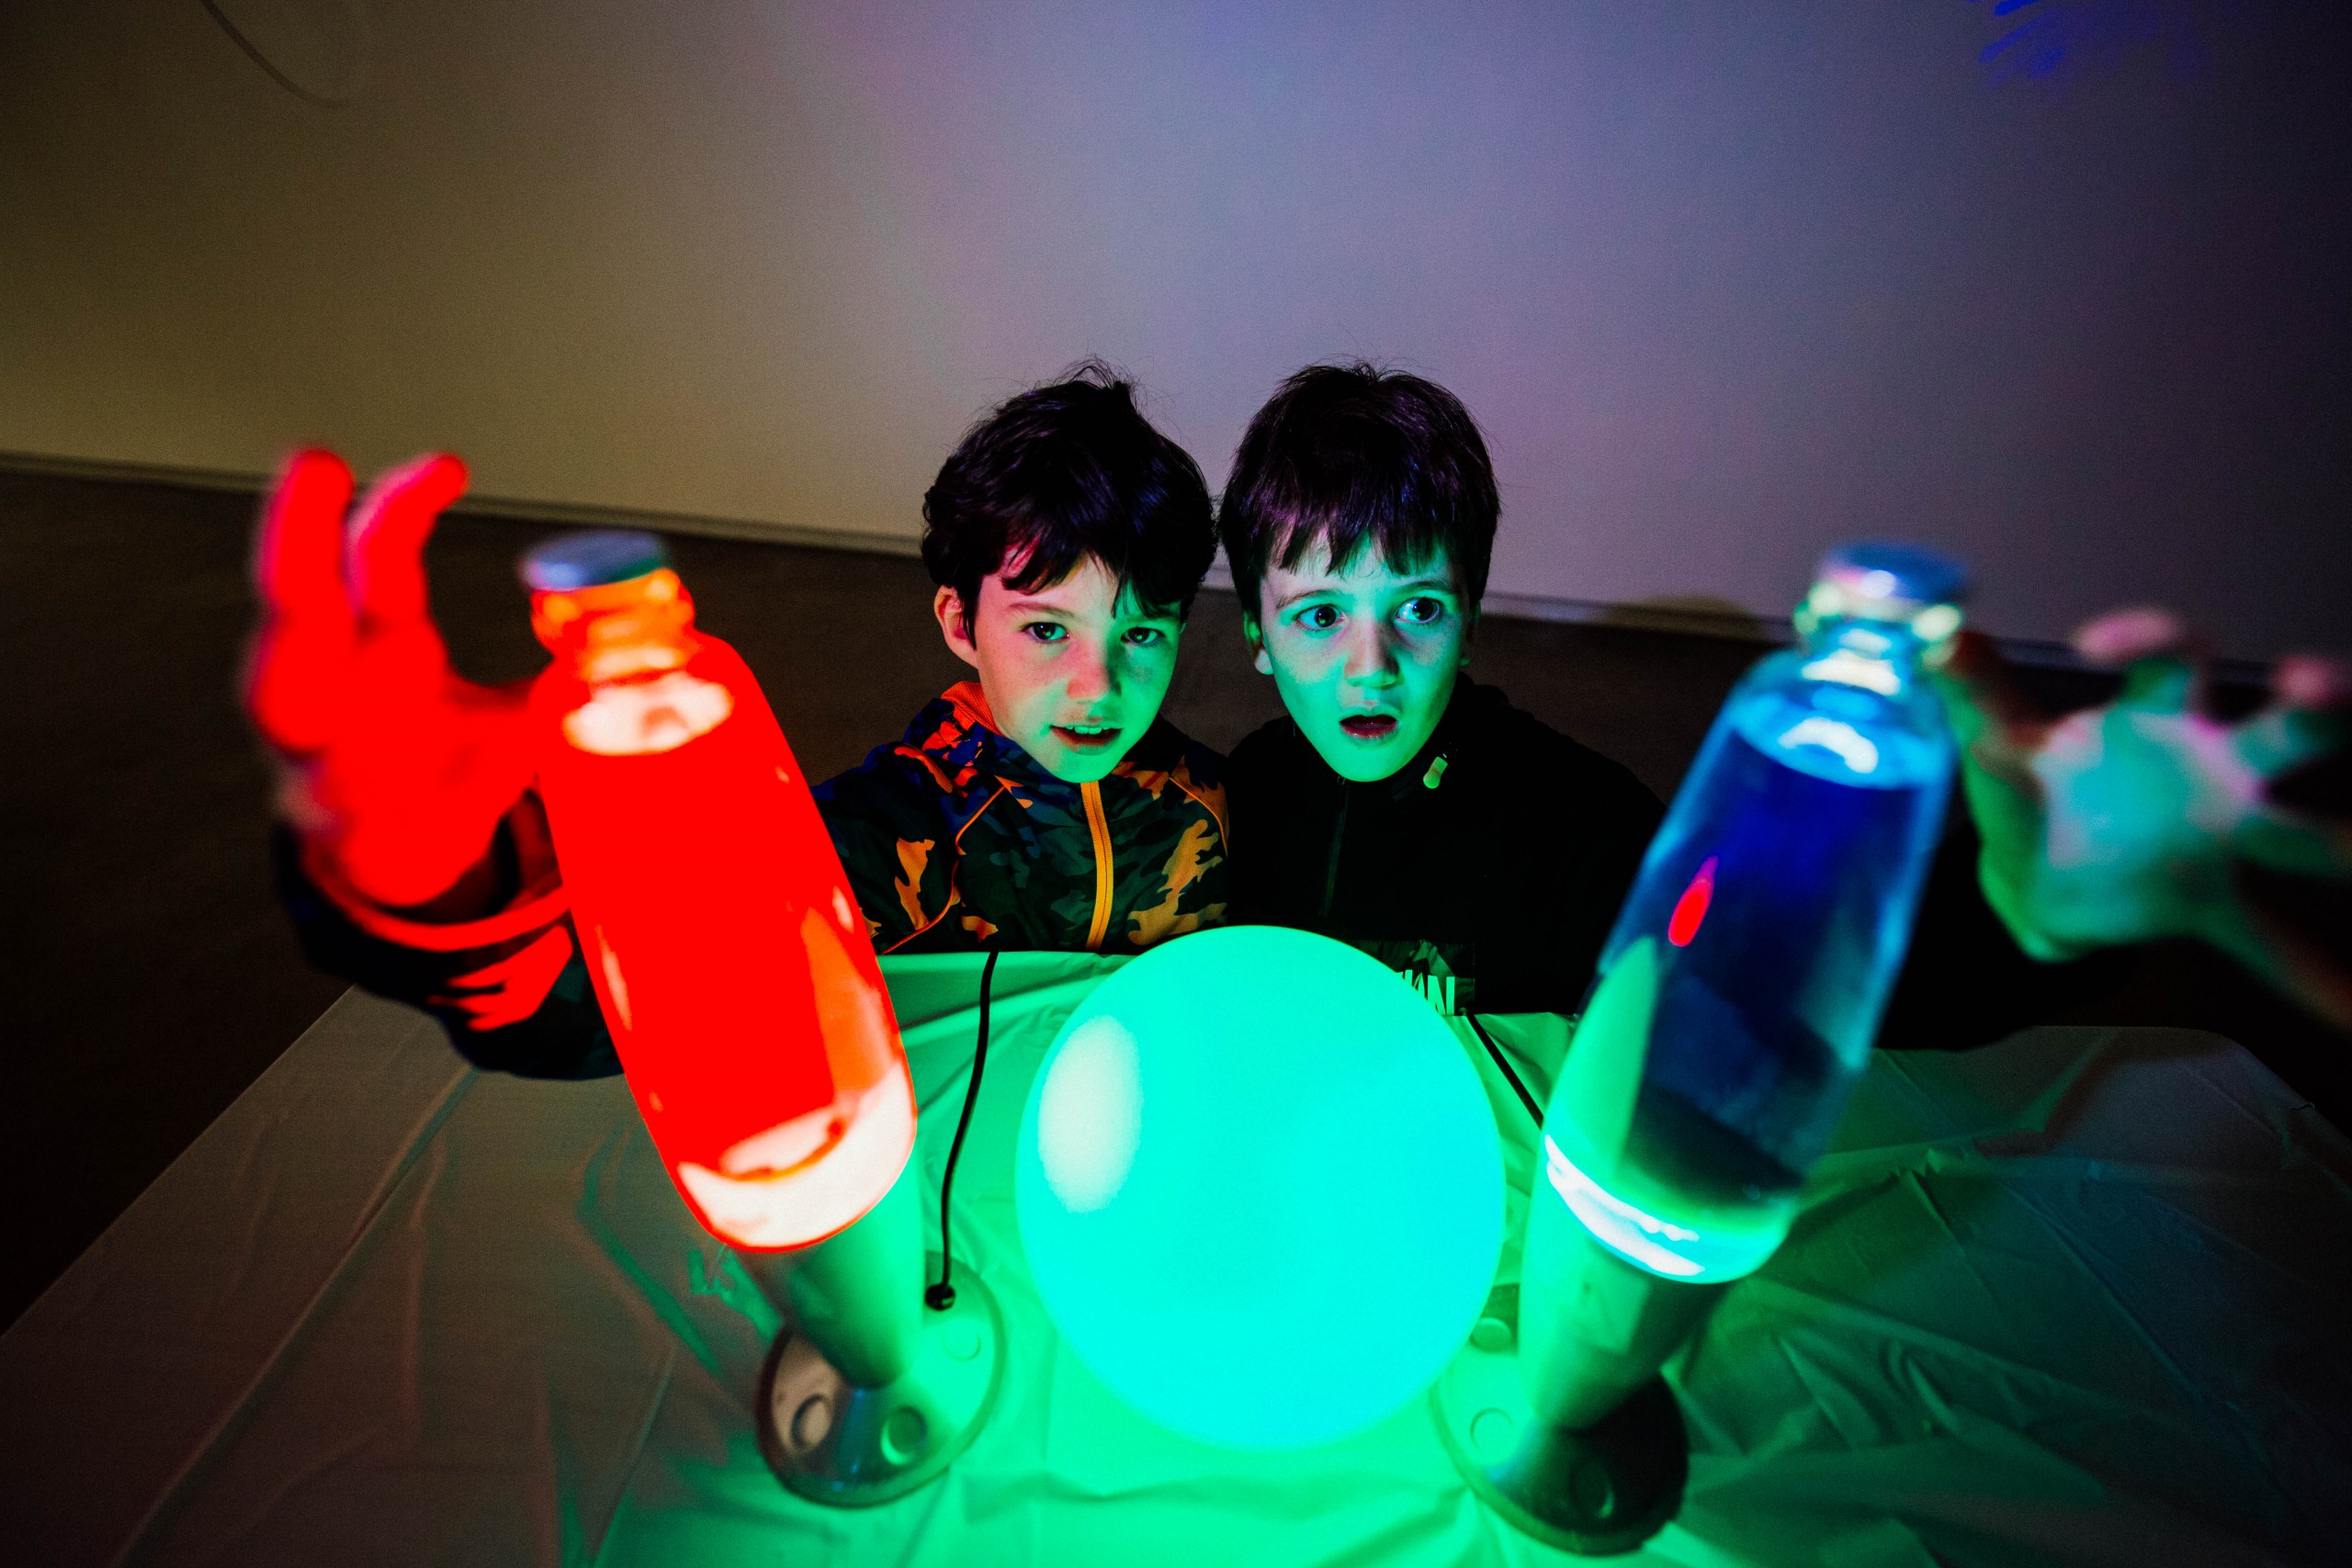 Two young boys reach up to two lava lamps, one red and one blue